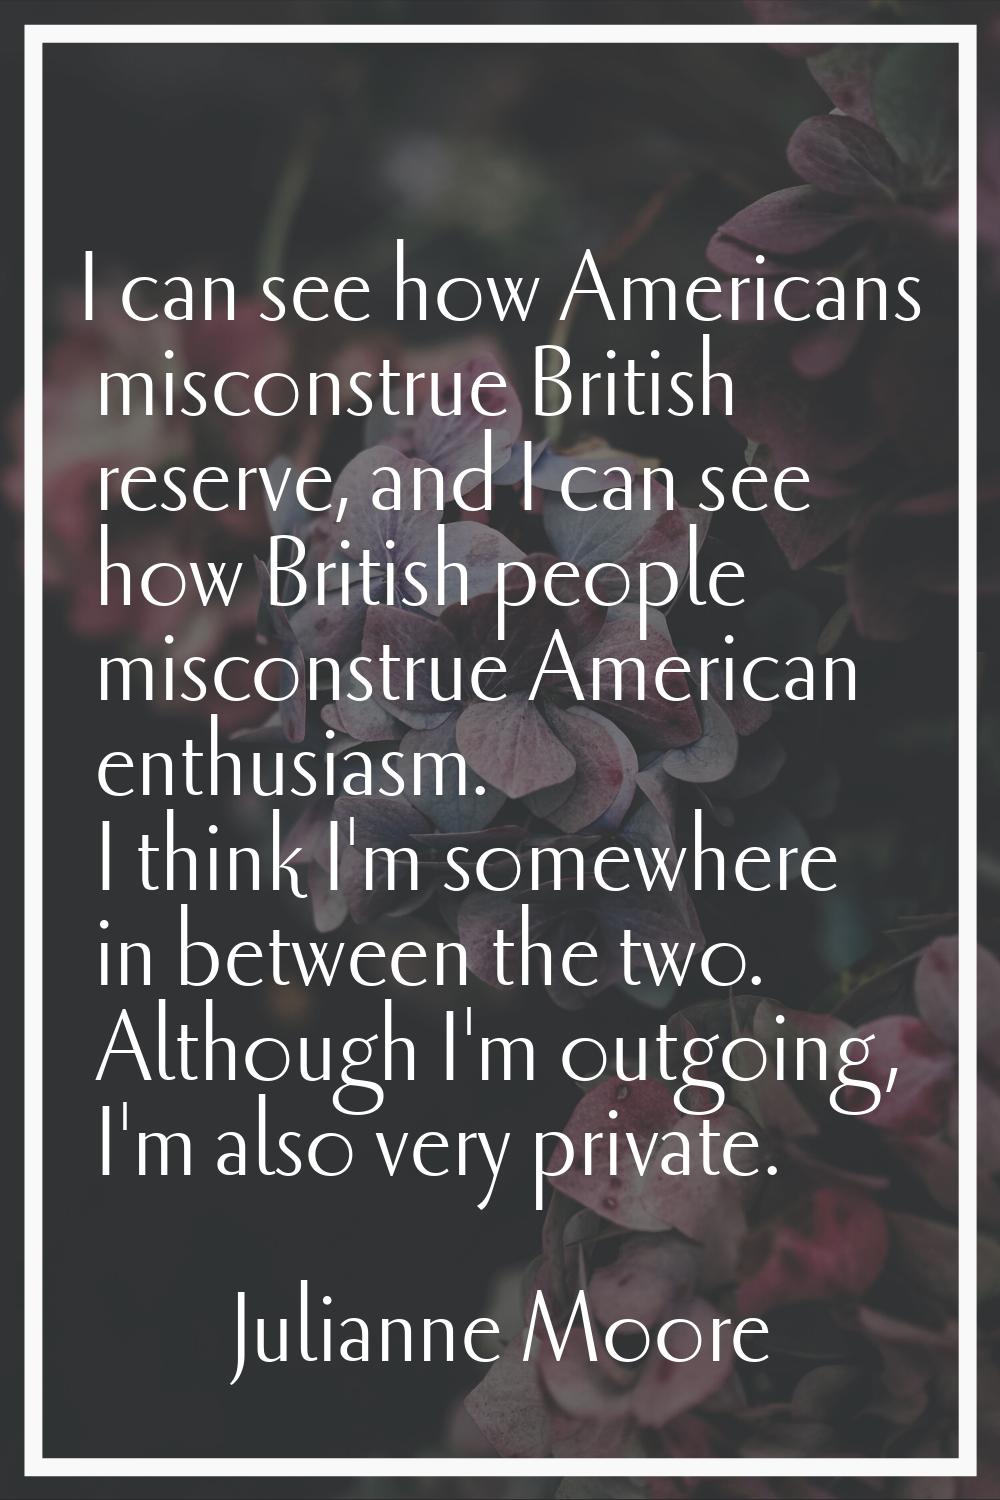 I can see how Americans misconstrue British reserve, and I can see how British people misconstrue A